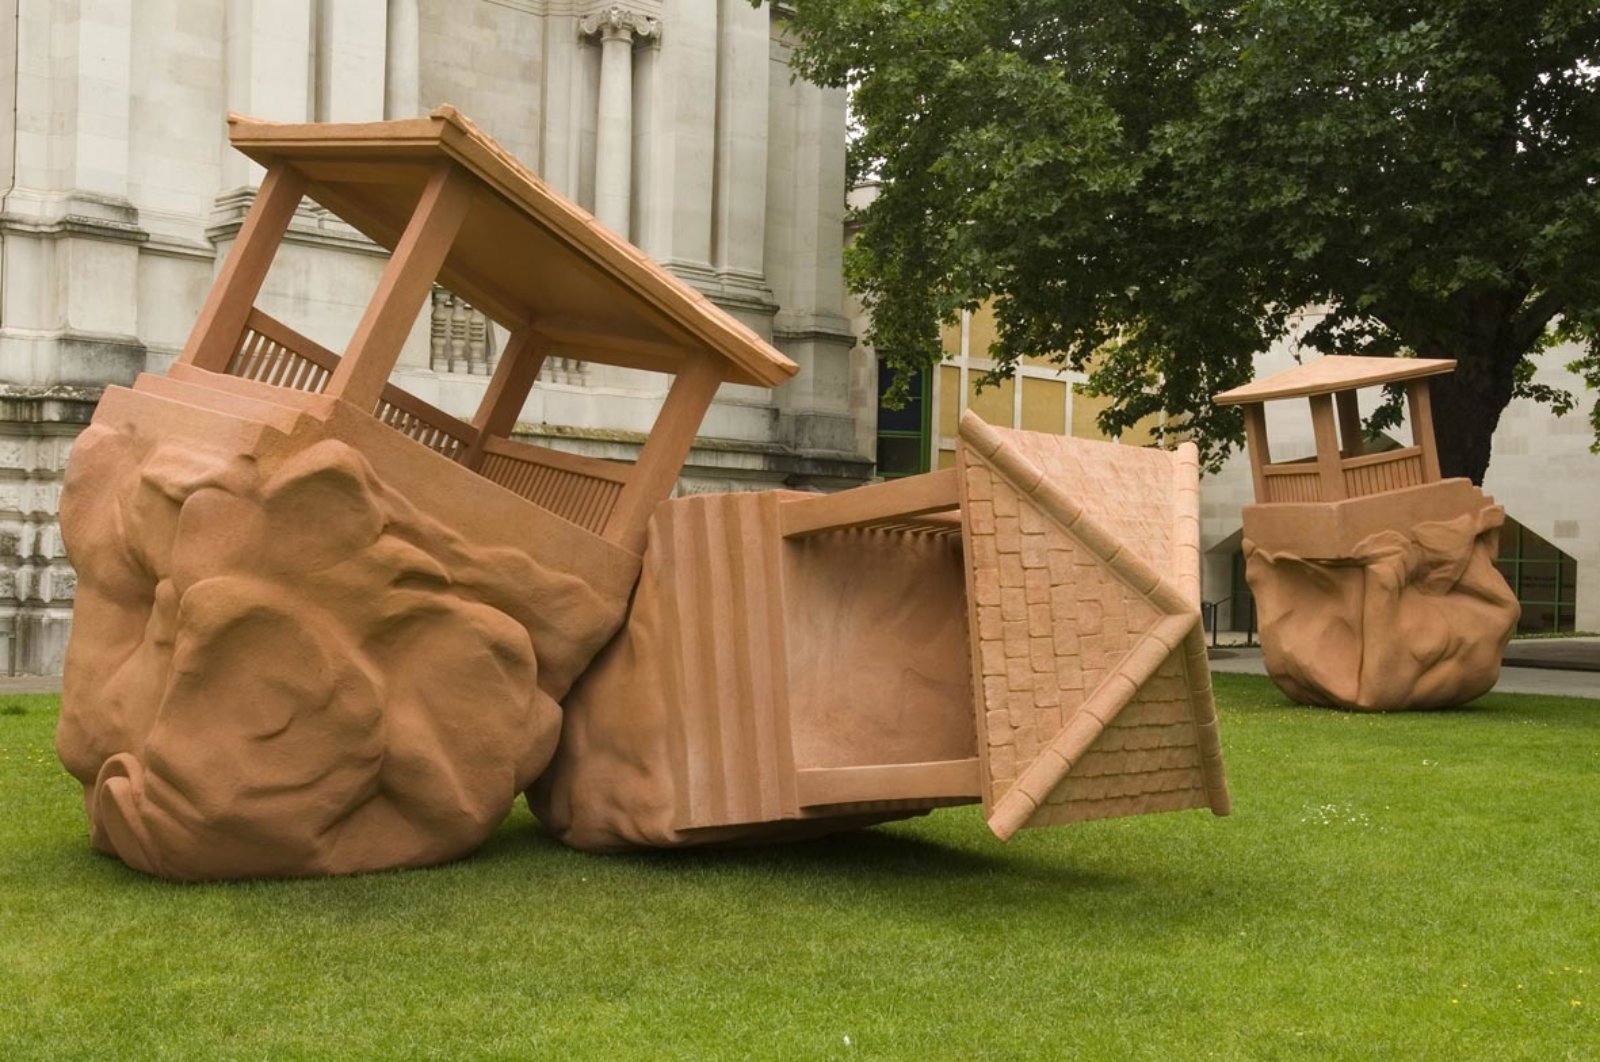 Christina Mackie, The Large Huts, 2007, steel, polystyrene, acrylic cement render, dimensions variable. Installation view, Art Now Sculpture Court, Tate Britain, London, UK